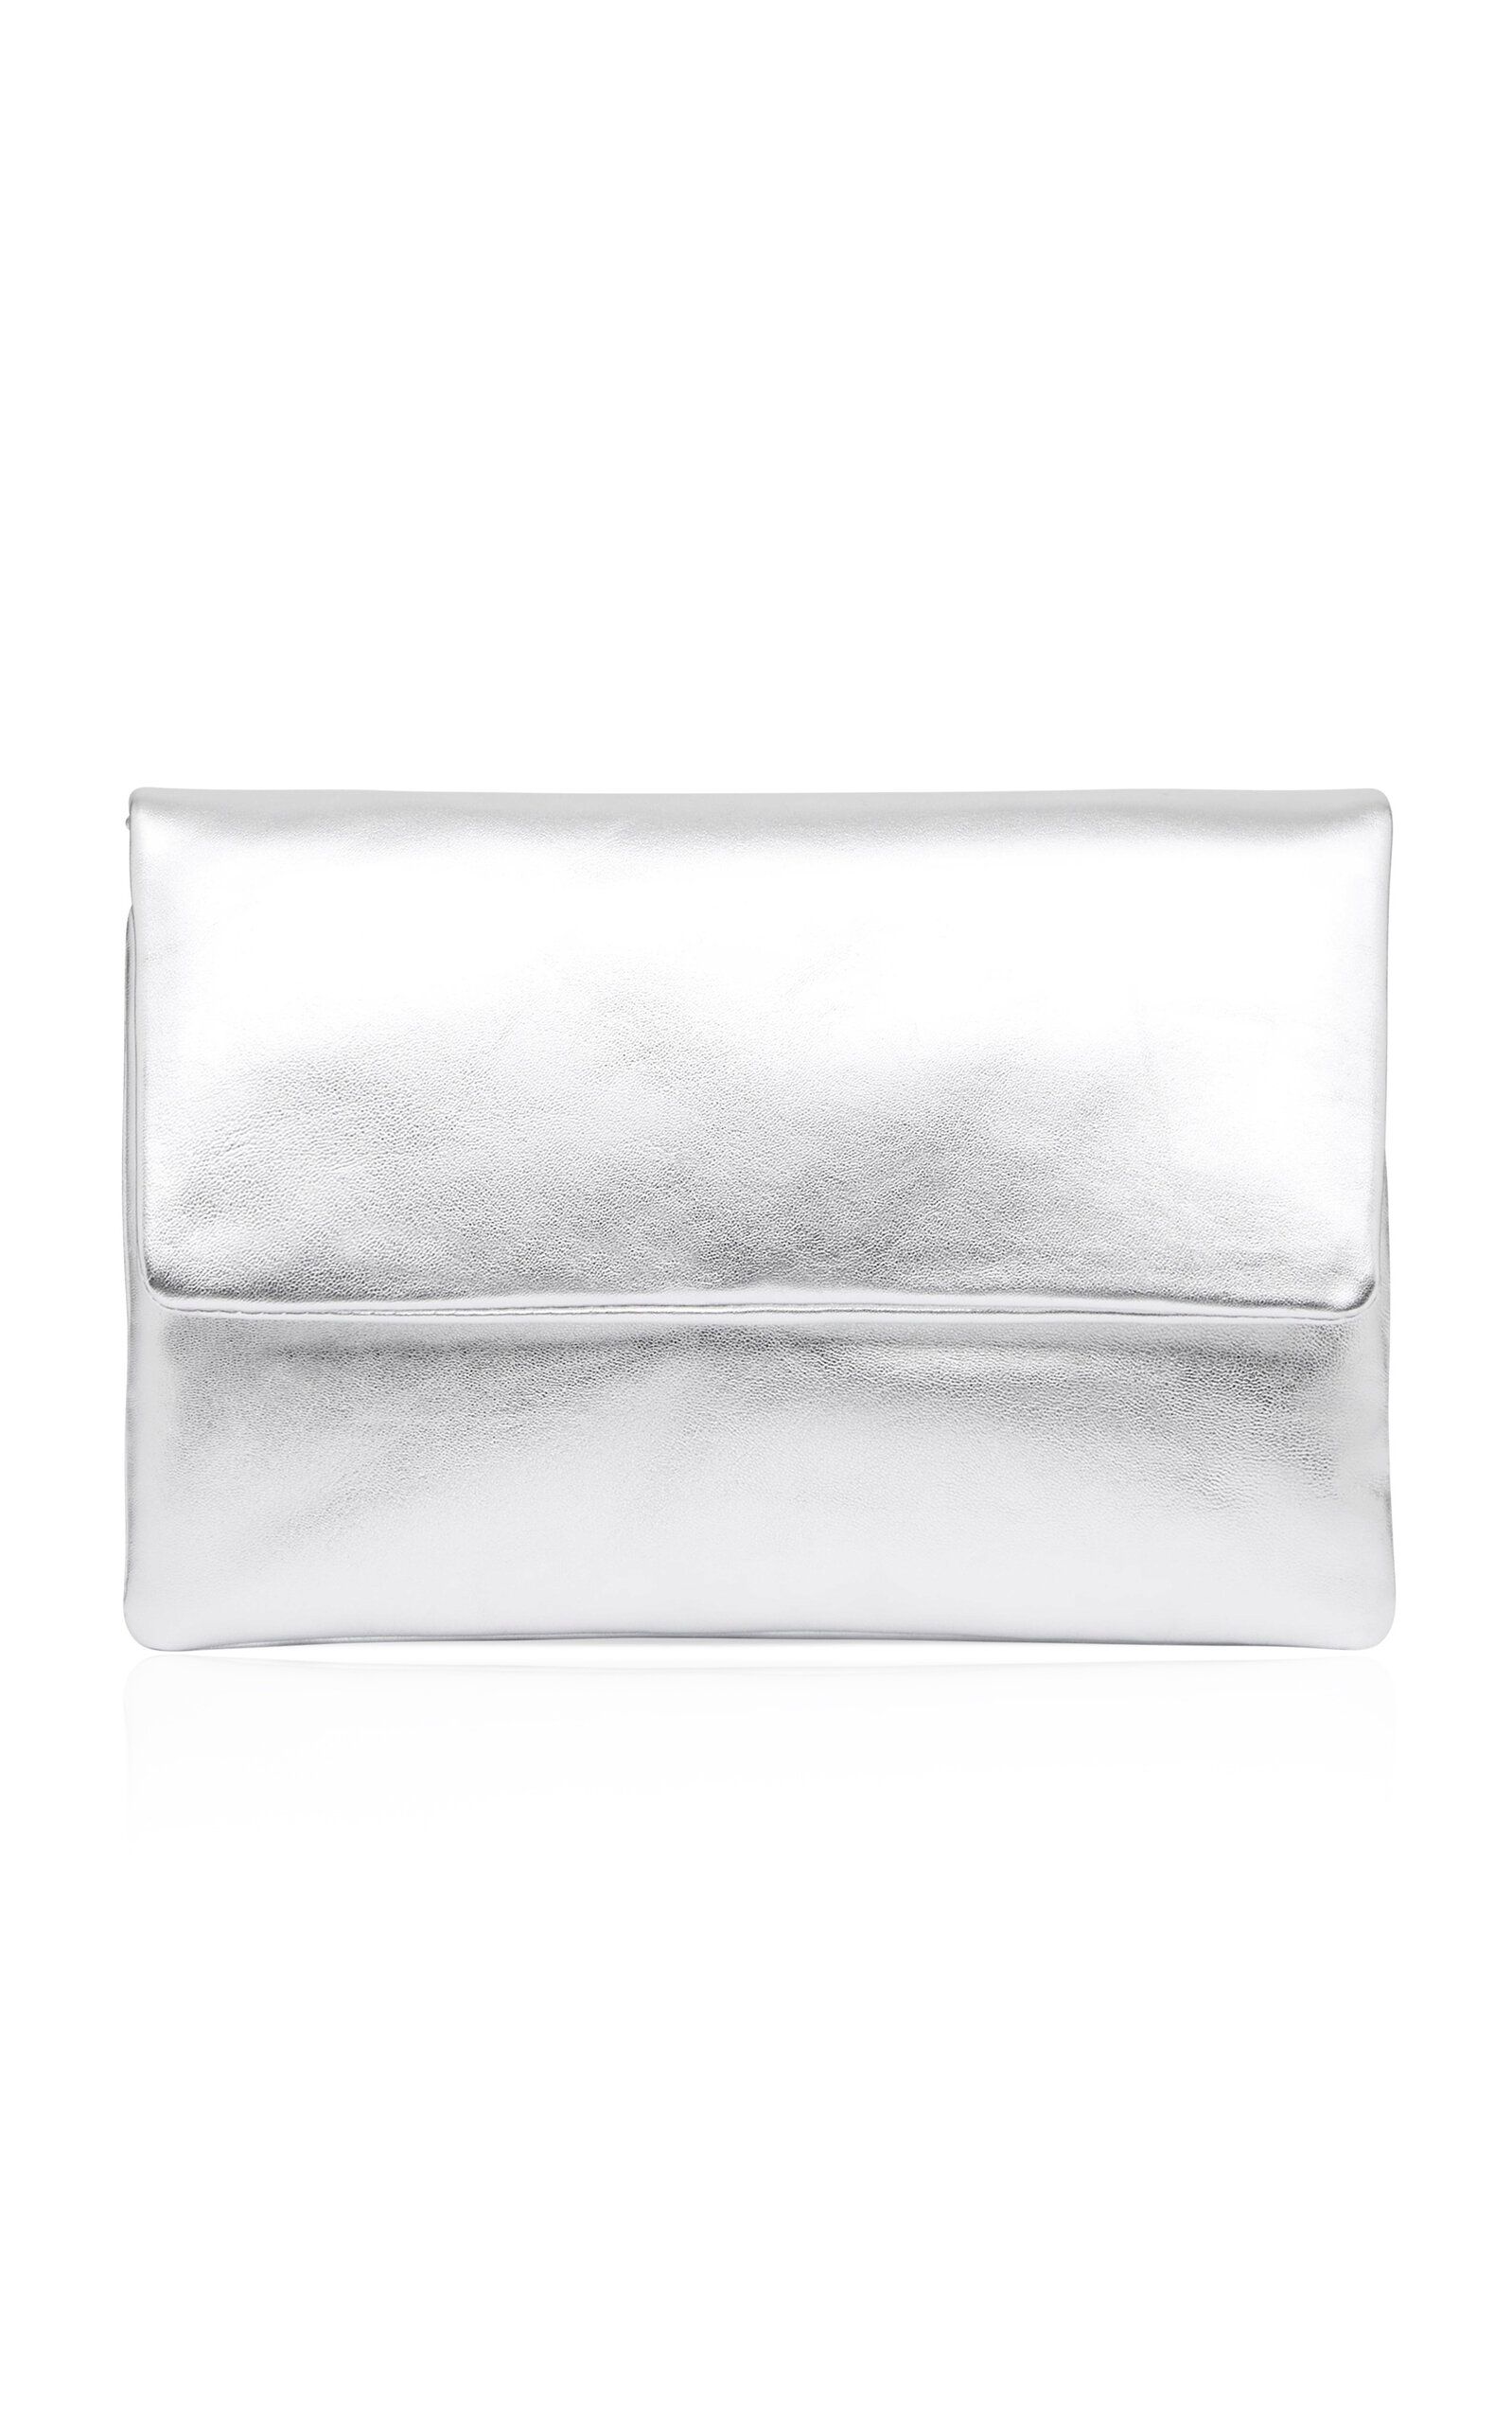 Dual Envelope Leather Clutch